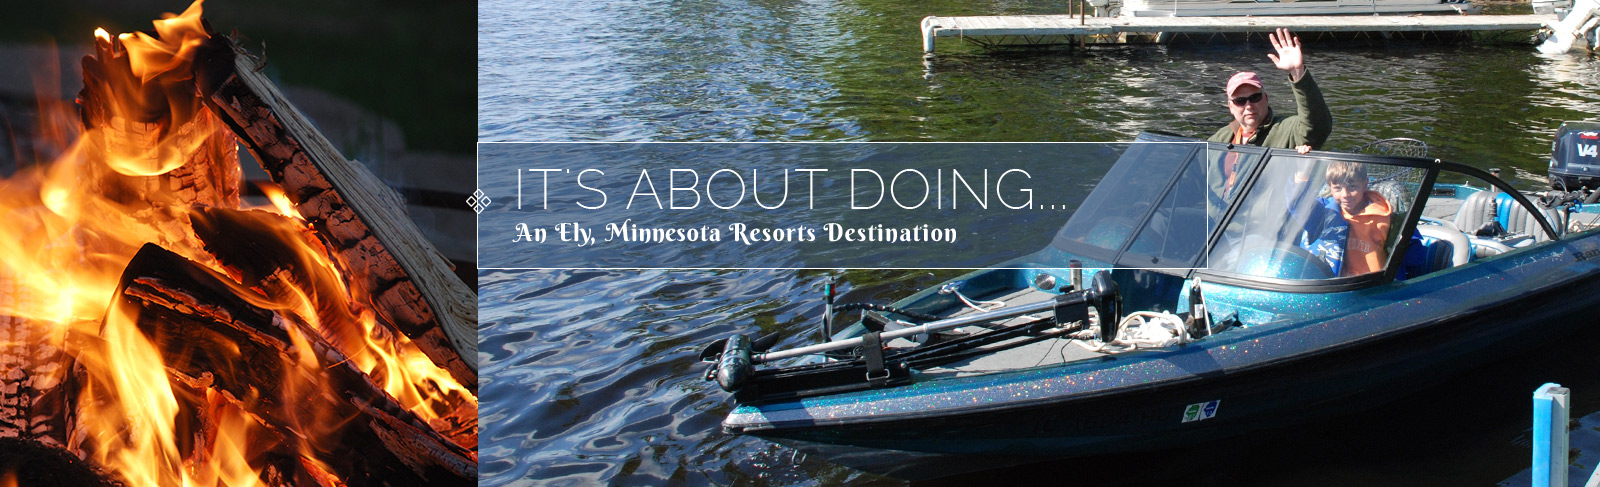 Minnesota Resorts-Ely Minnesota Resorts-River Point Resort-Things To Do On Land, On Water